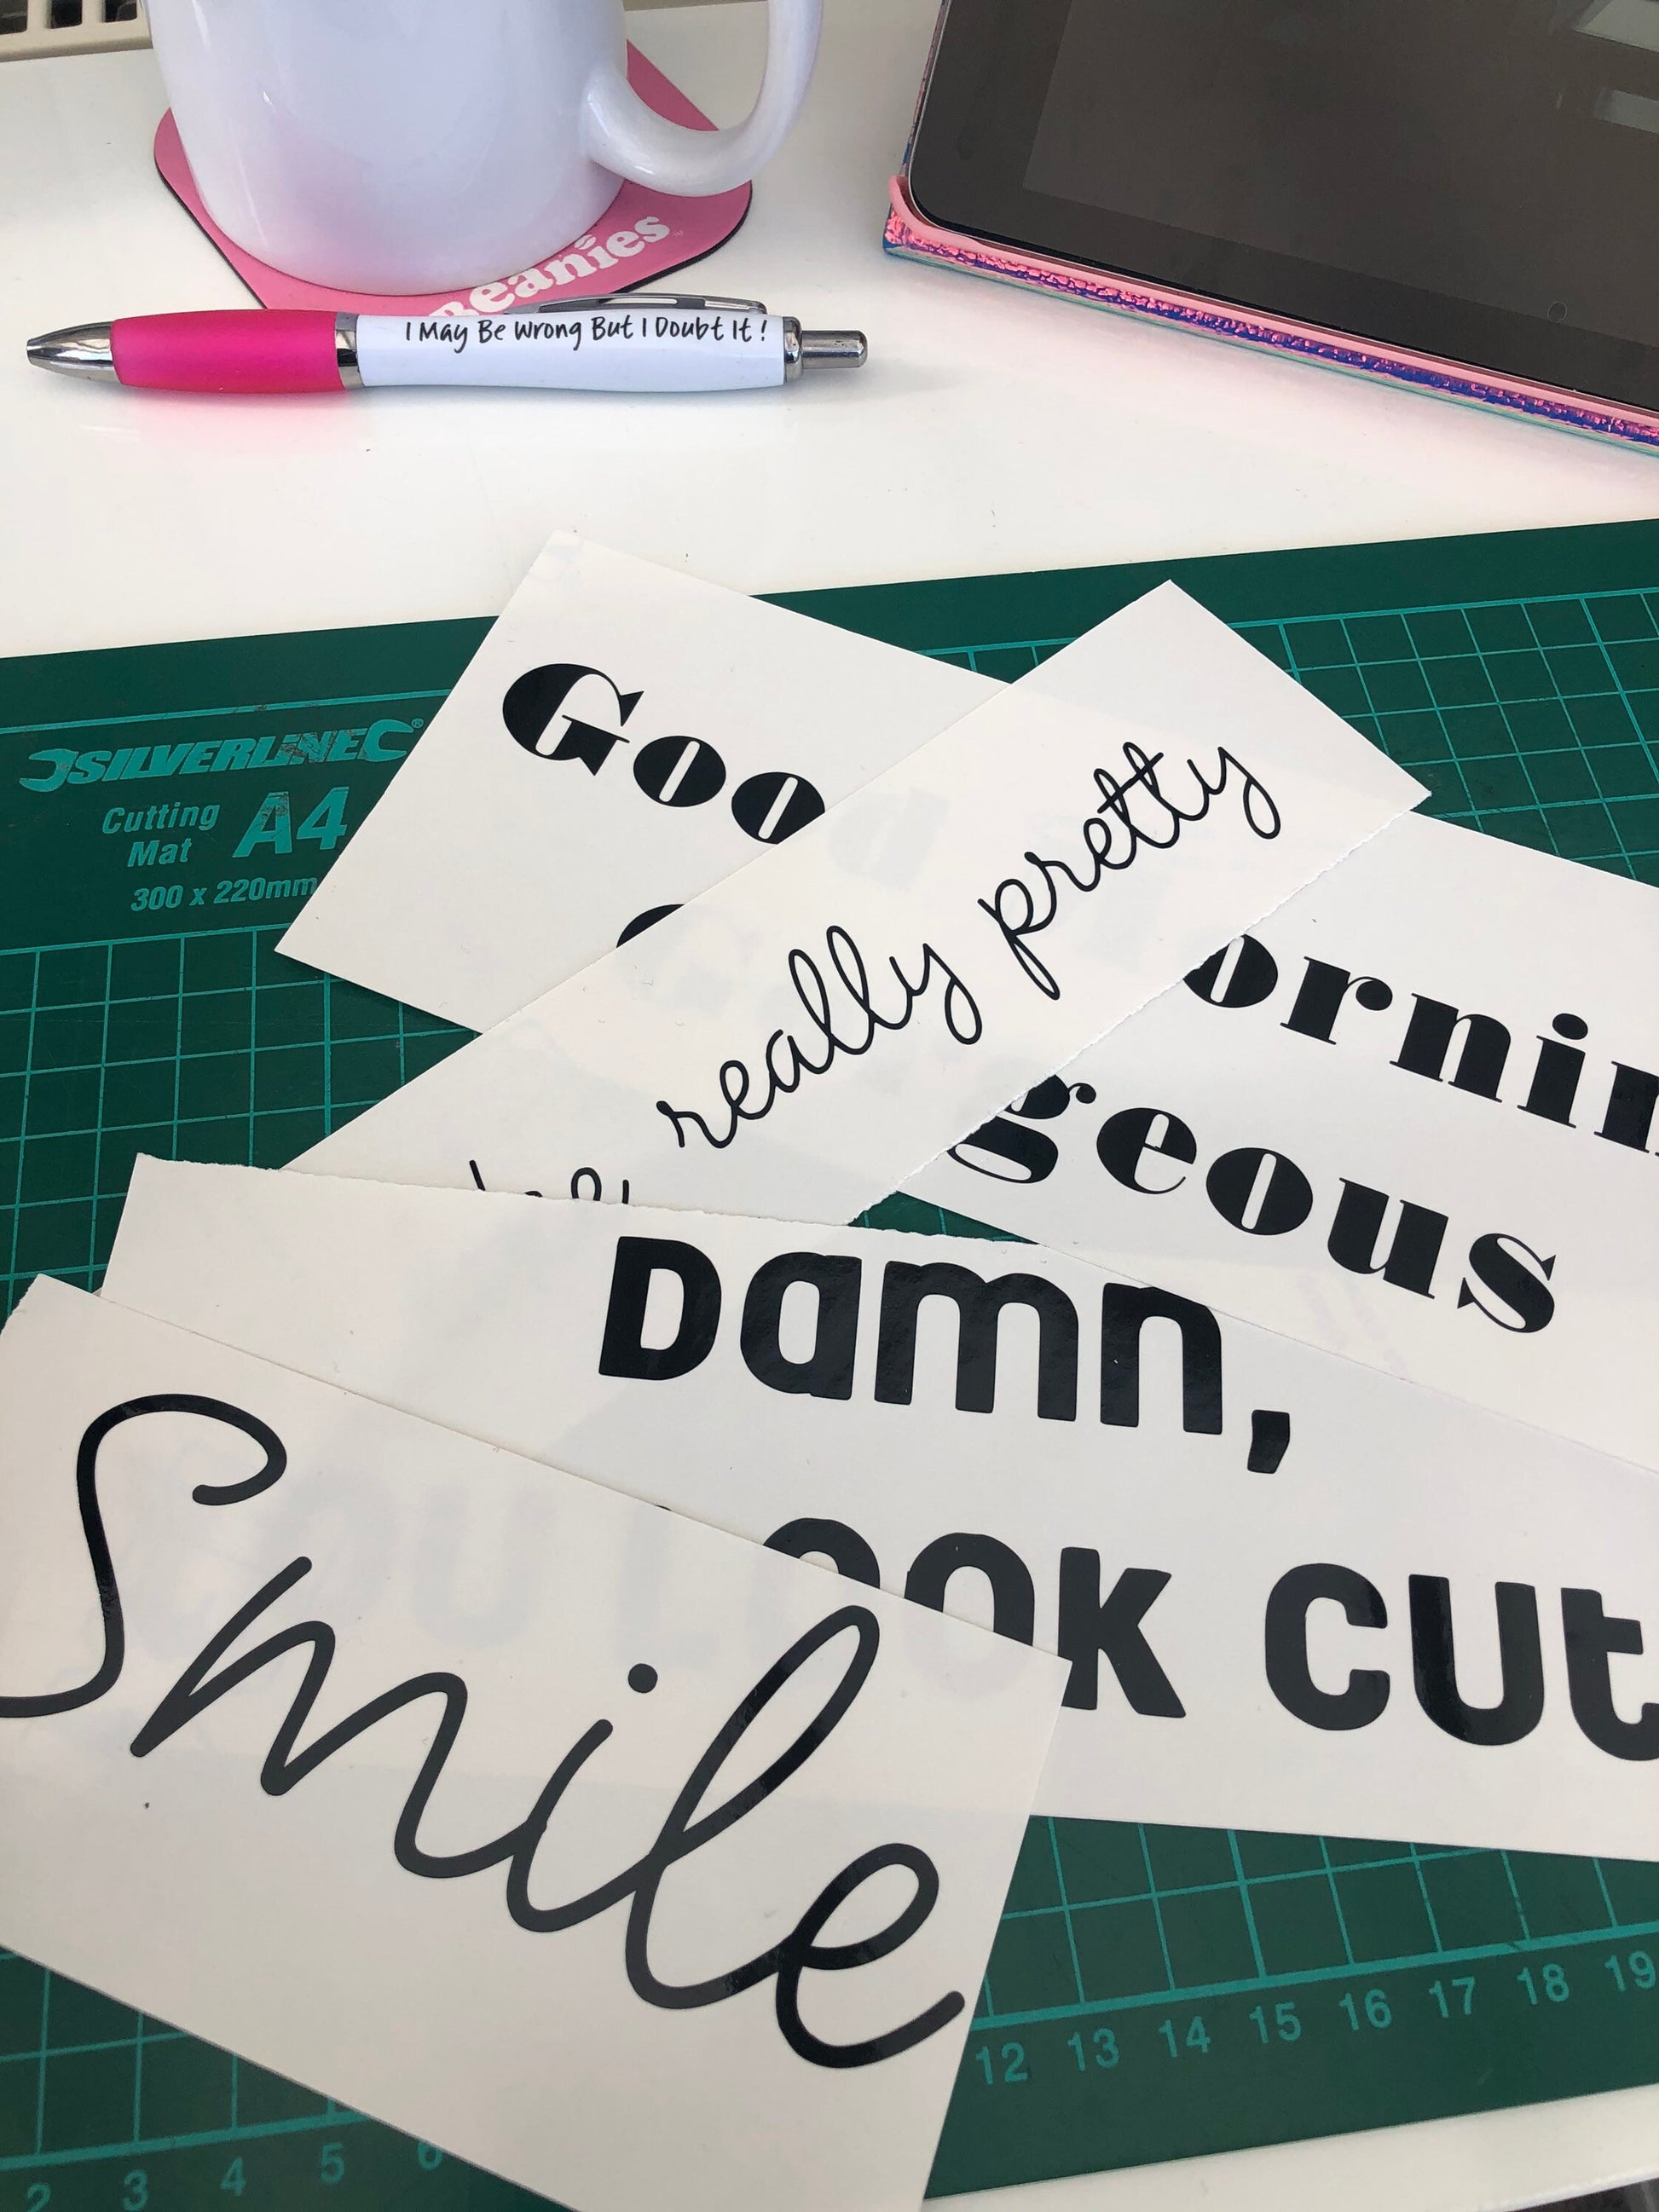 Smile Mirror Decal - Self Care - Daily Reminder